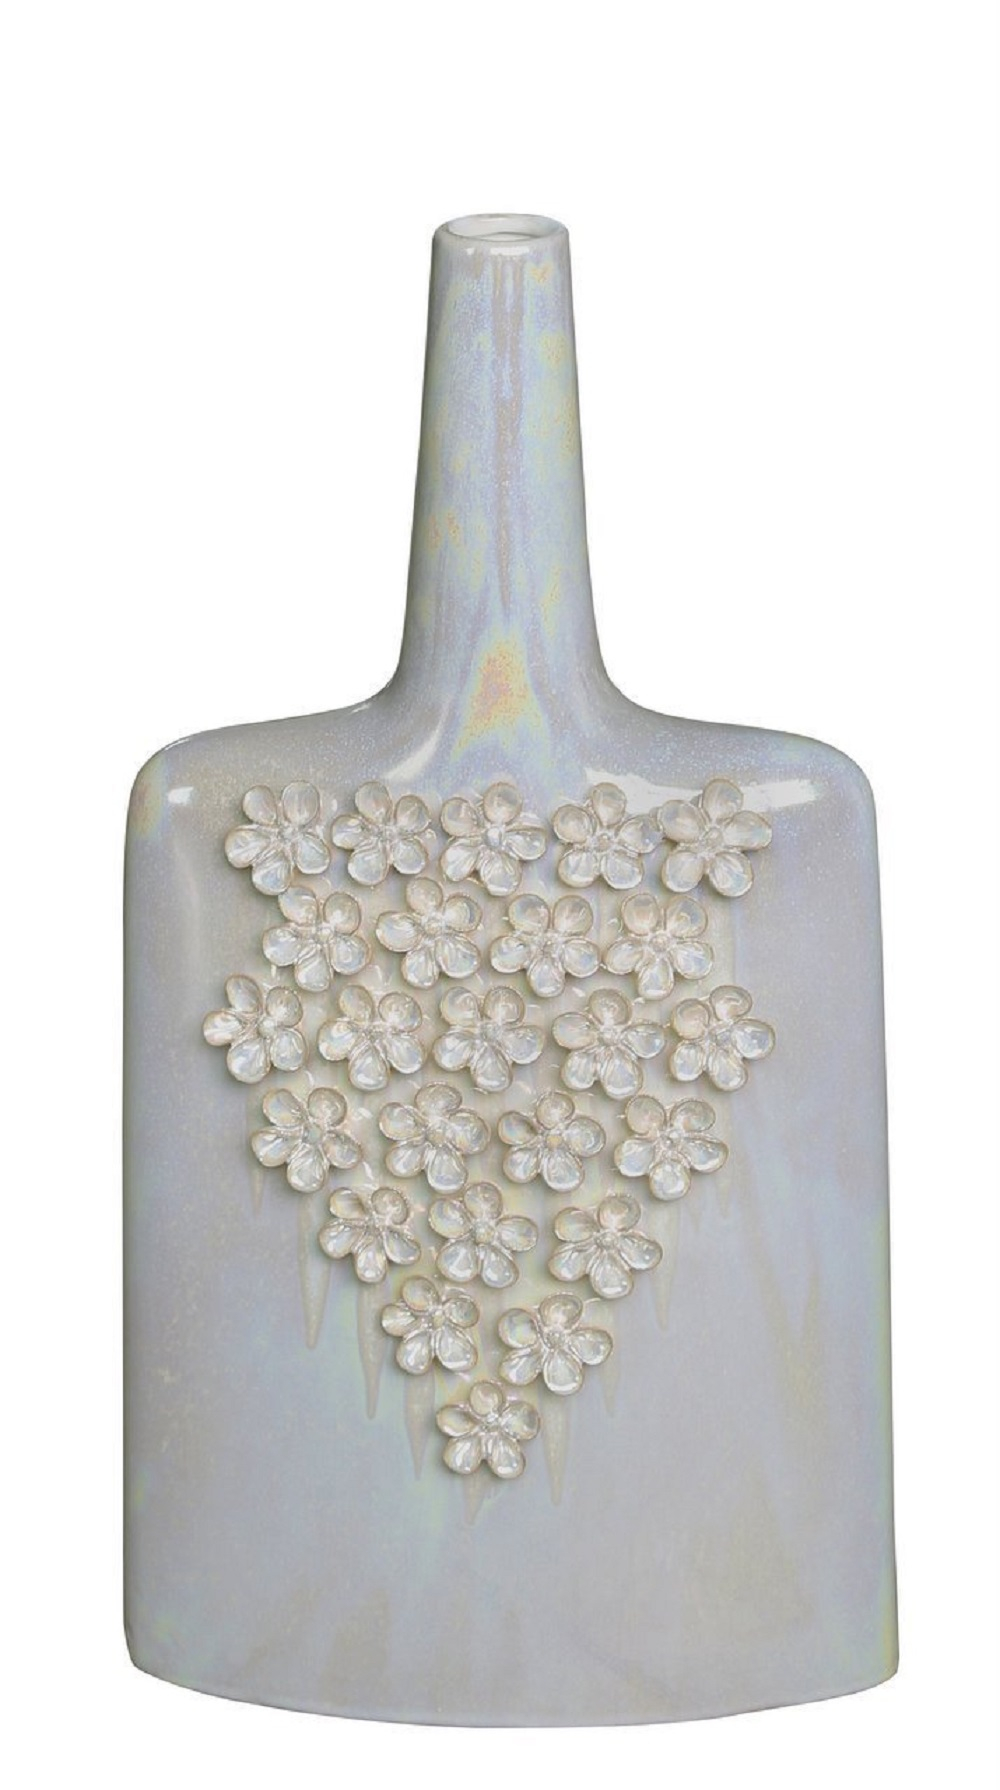 Details About One Tall Cream Flower Bud Bottle Table Floor Vase Mother Of Pearl Ceramic 495cm for measurements 1000 X 1790